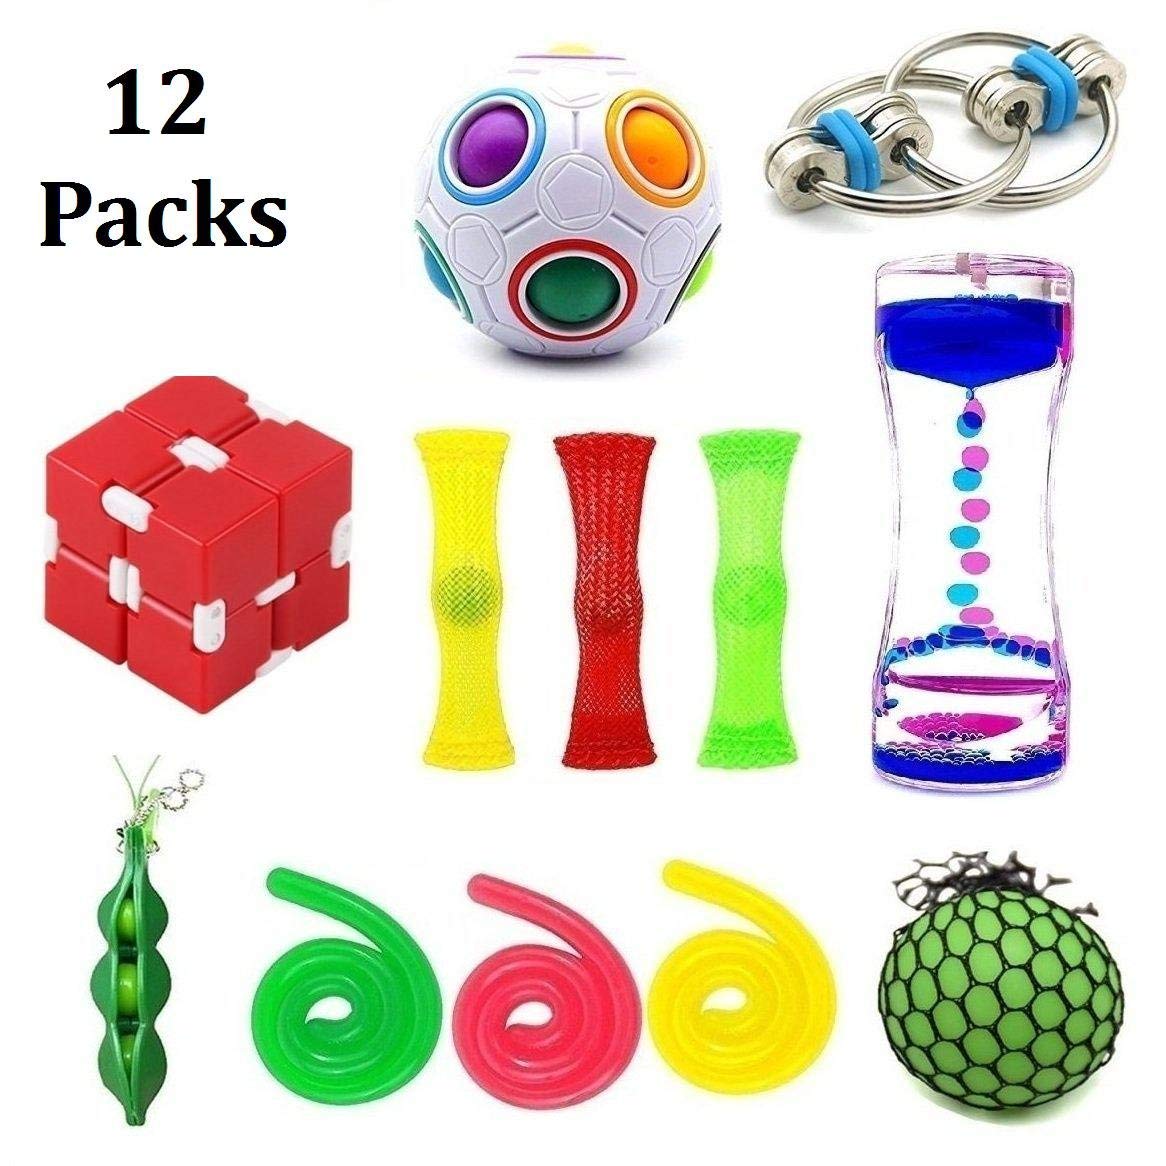 SpringFly 12 Pack Bundle Fidget Toys-Liquid Motion Timer/Rainbow Magic Ball/Infinity Magic Cube/Fidget Chain/Twisted Toys/Mesh And Marble Toys and Squeeze Toys Sensory Toys